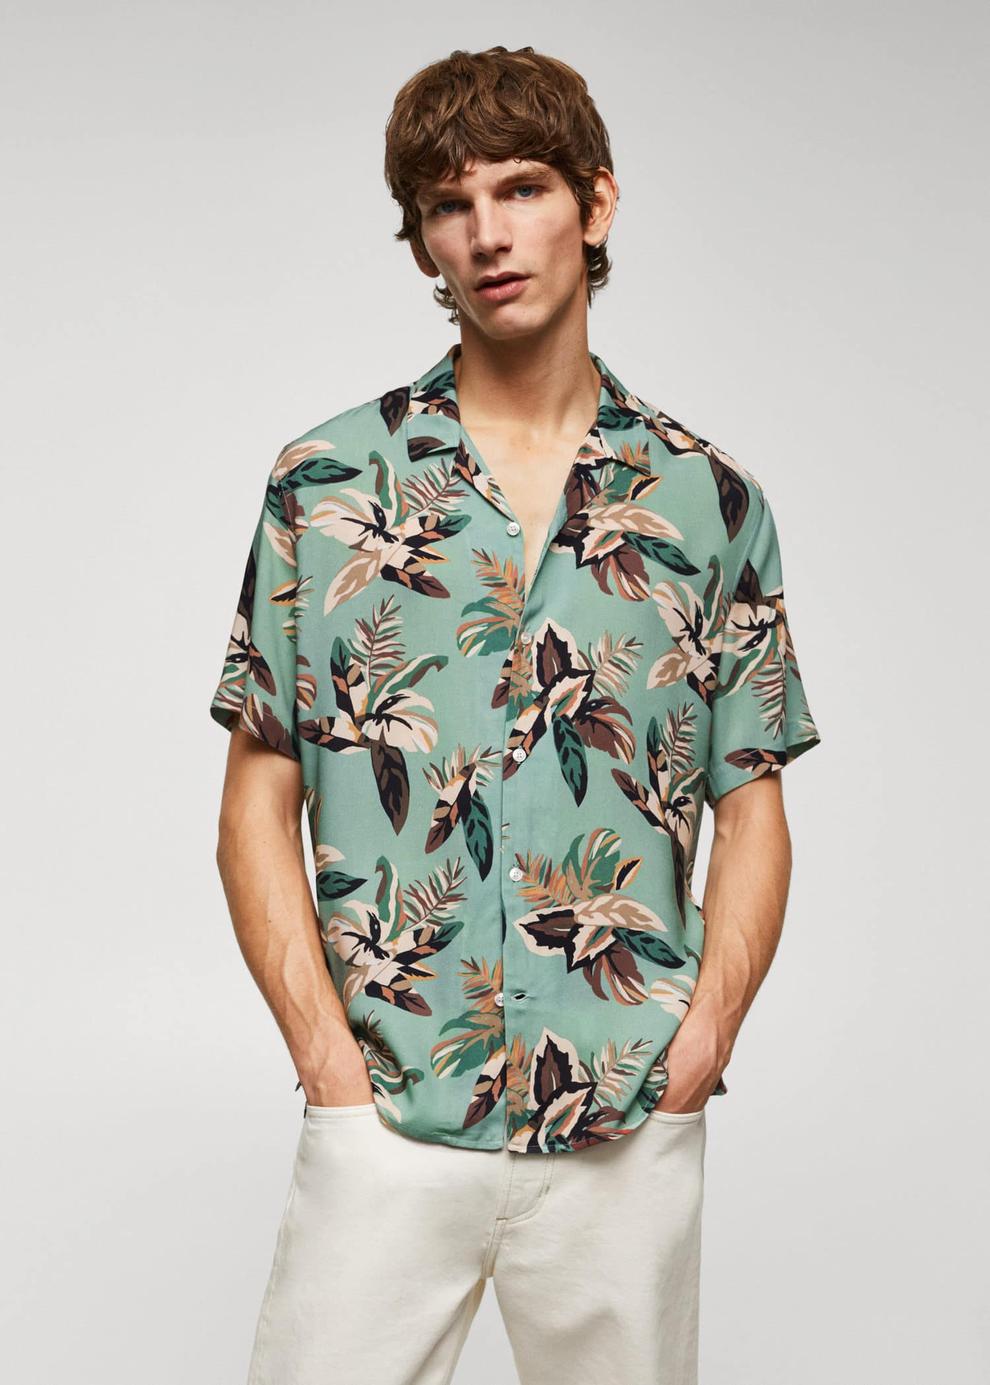 Regular fit floral print shirt offers at S$ 59.9 in HE by Mango